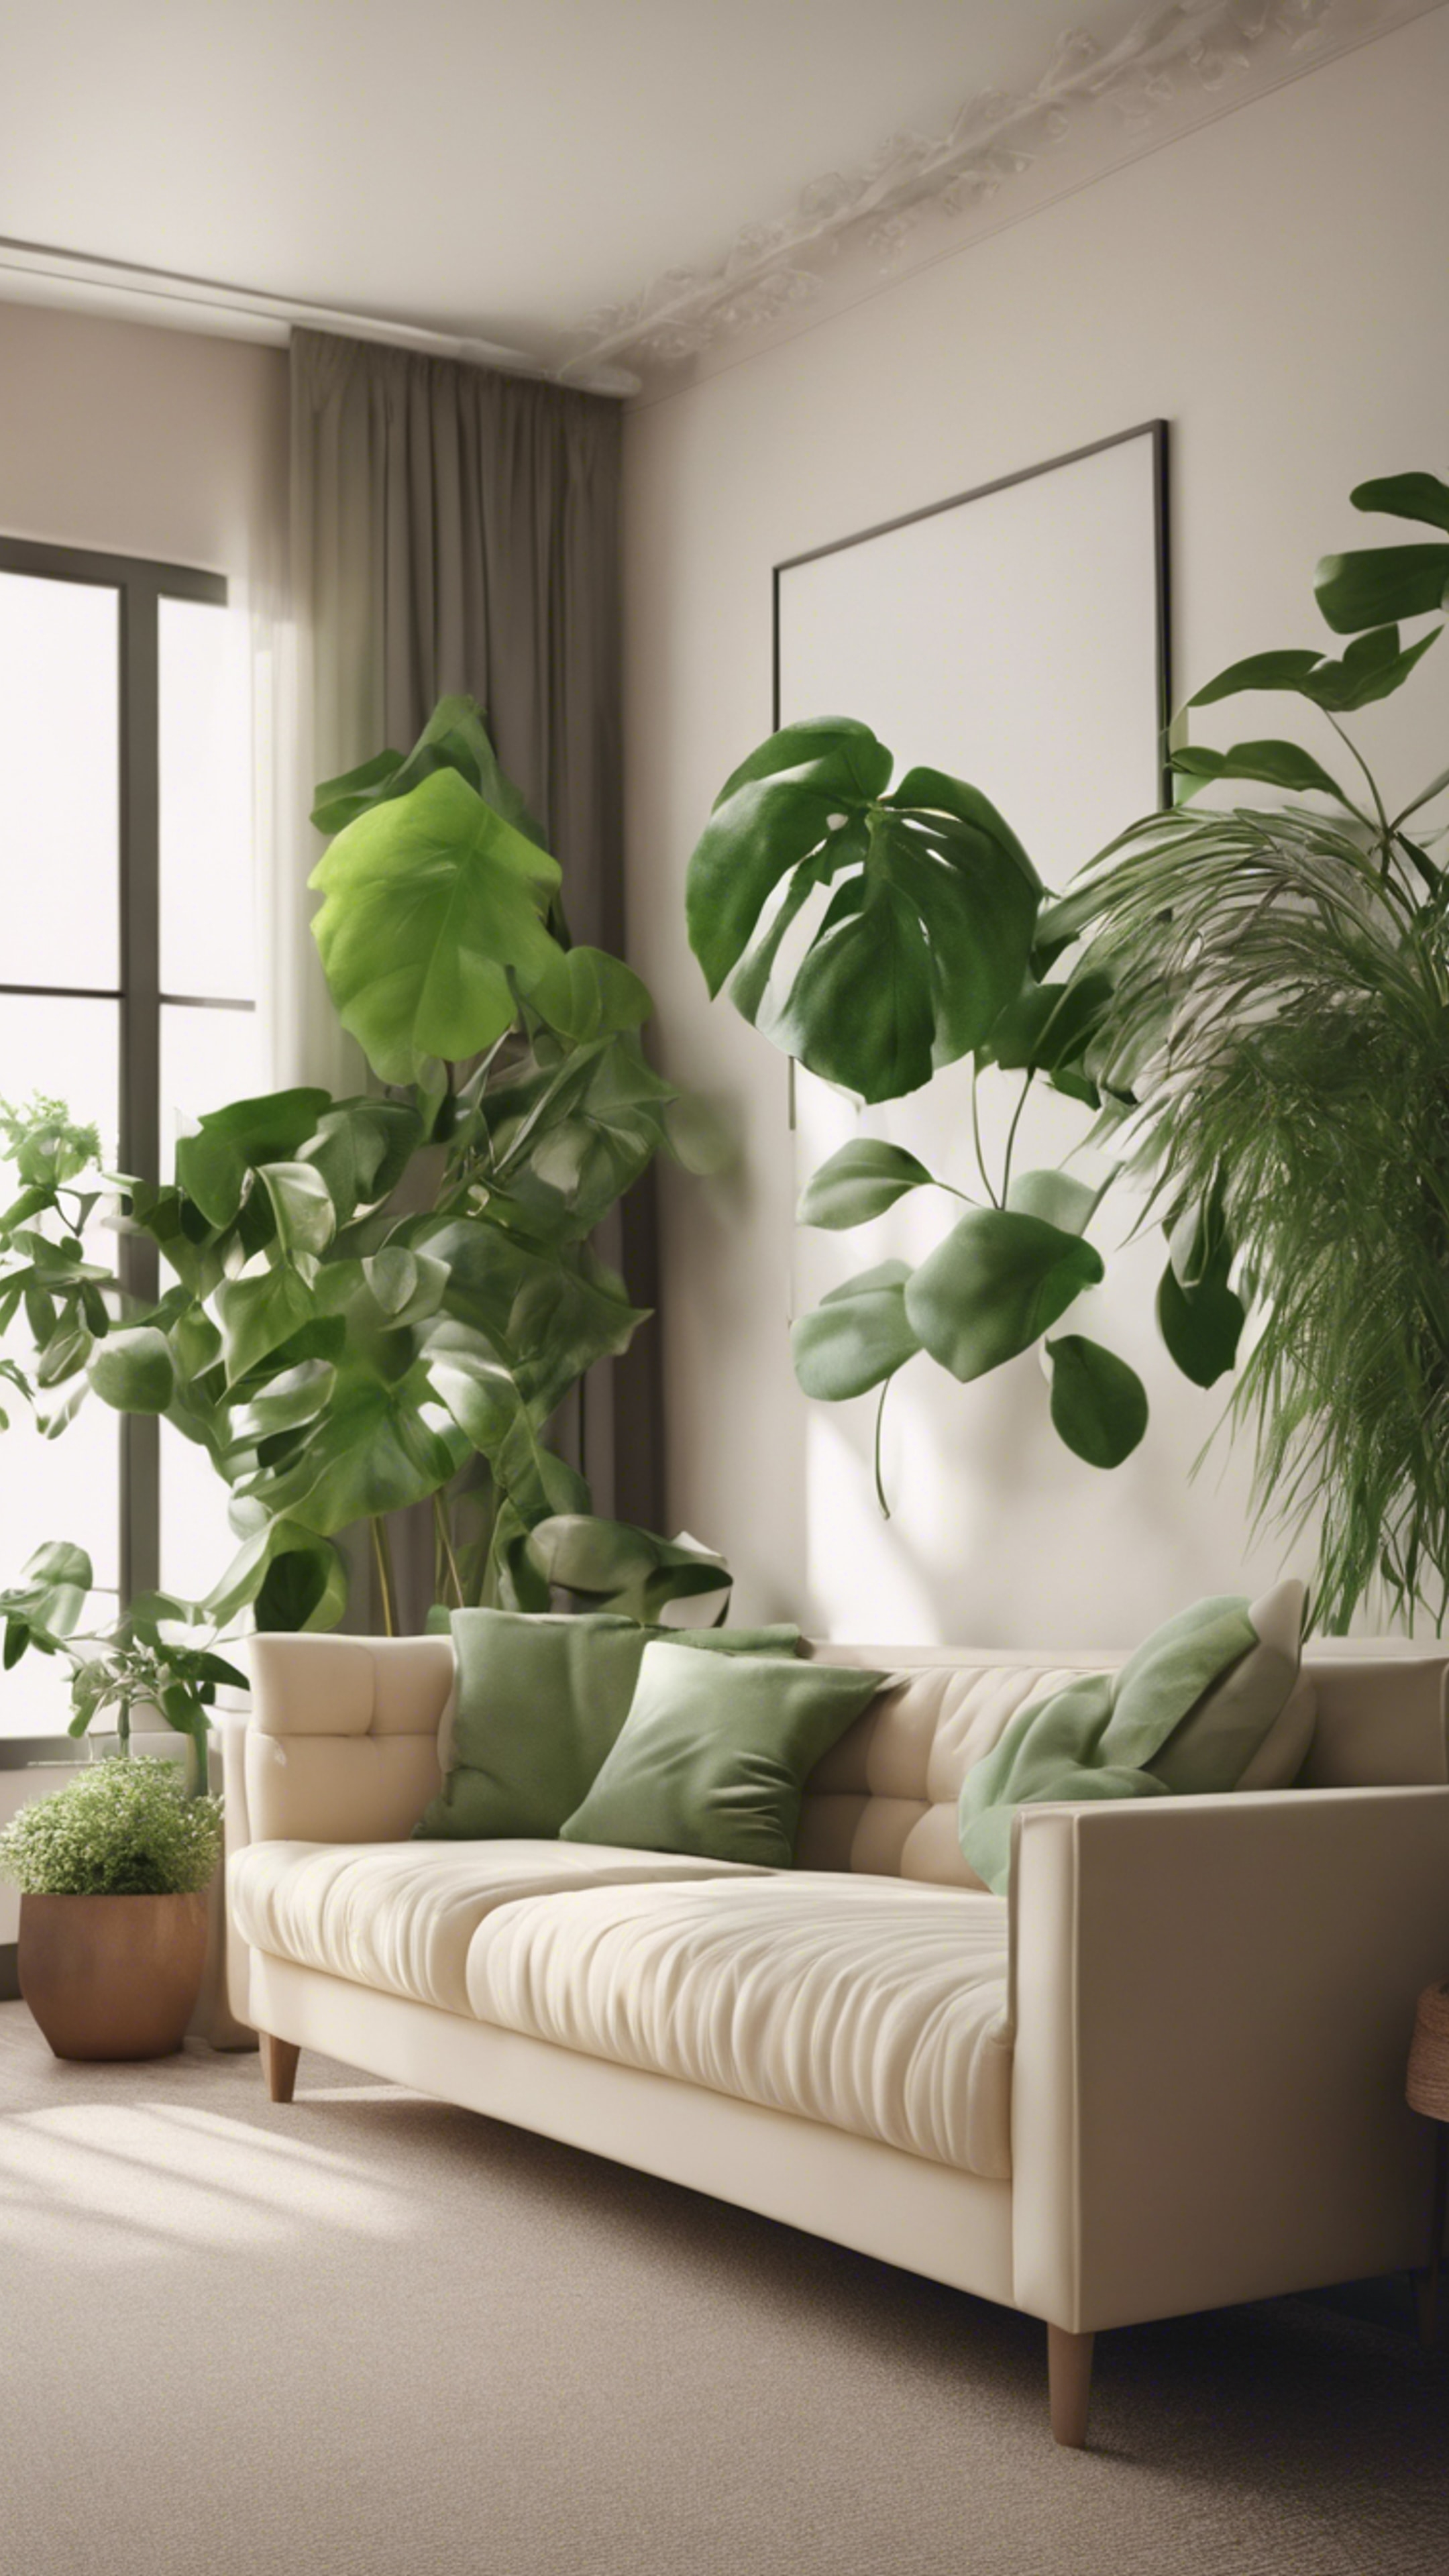 A simplistic living room featuring a cream couch contrasted with a natural green aesthetic of indoor plants Hintergrund[57c4f329650745189cc4]